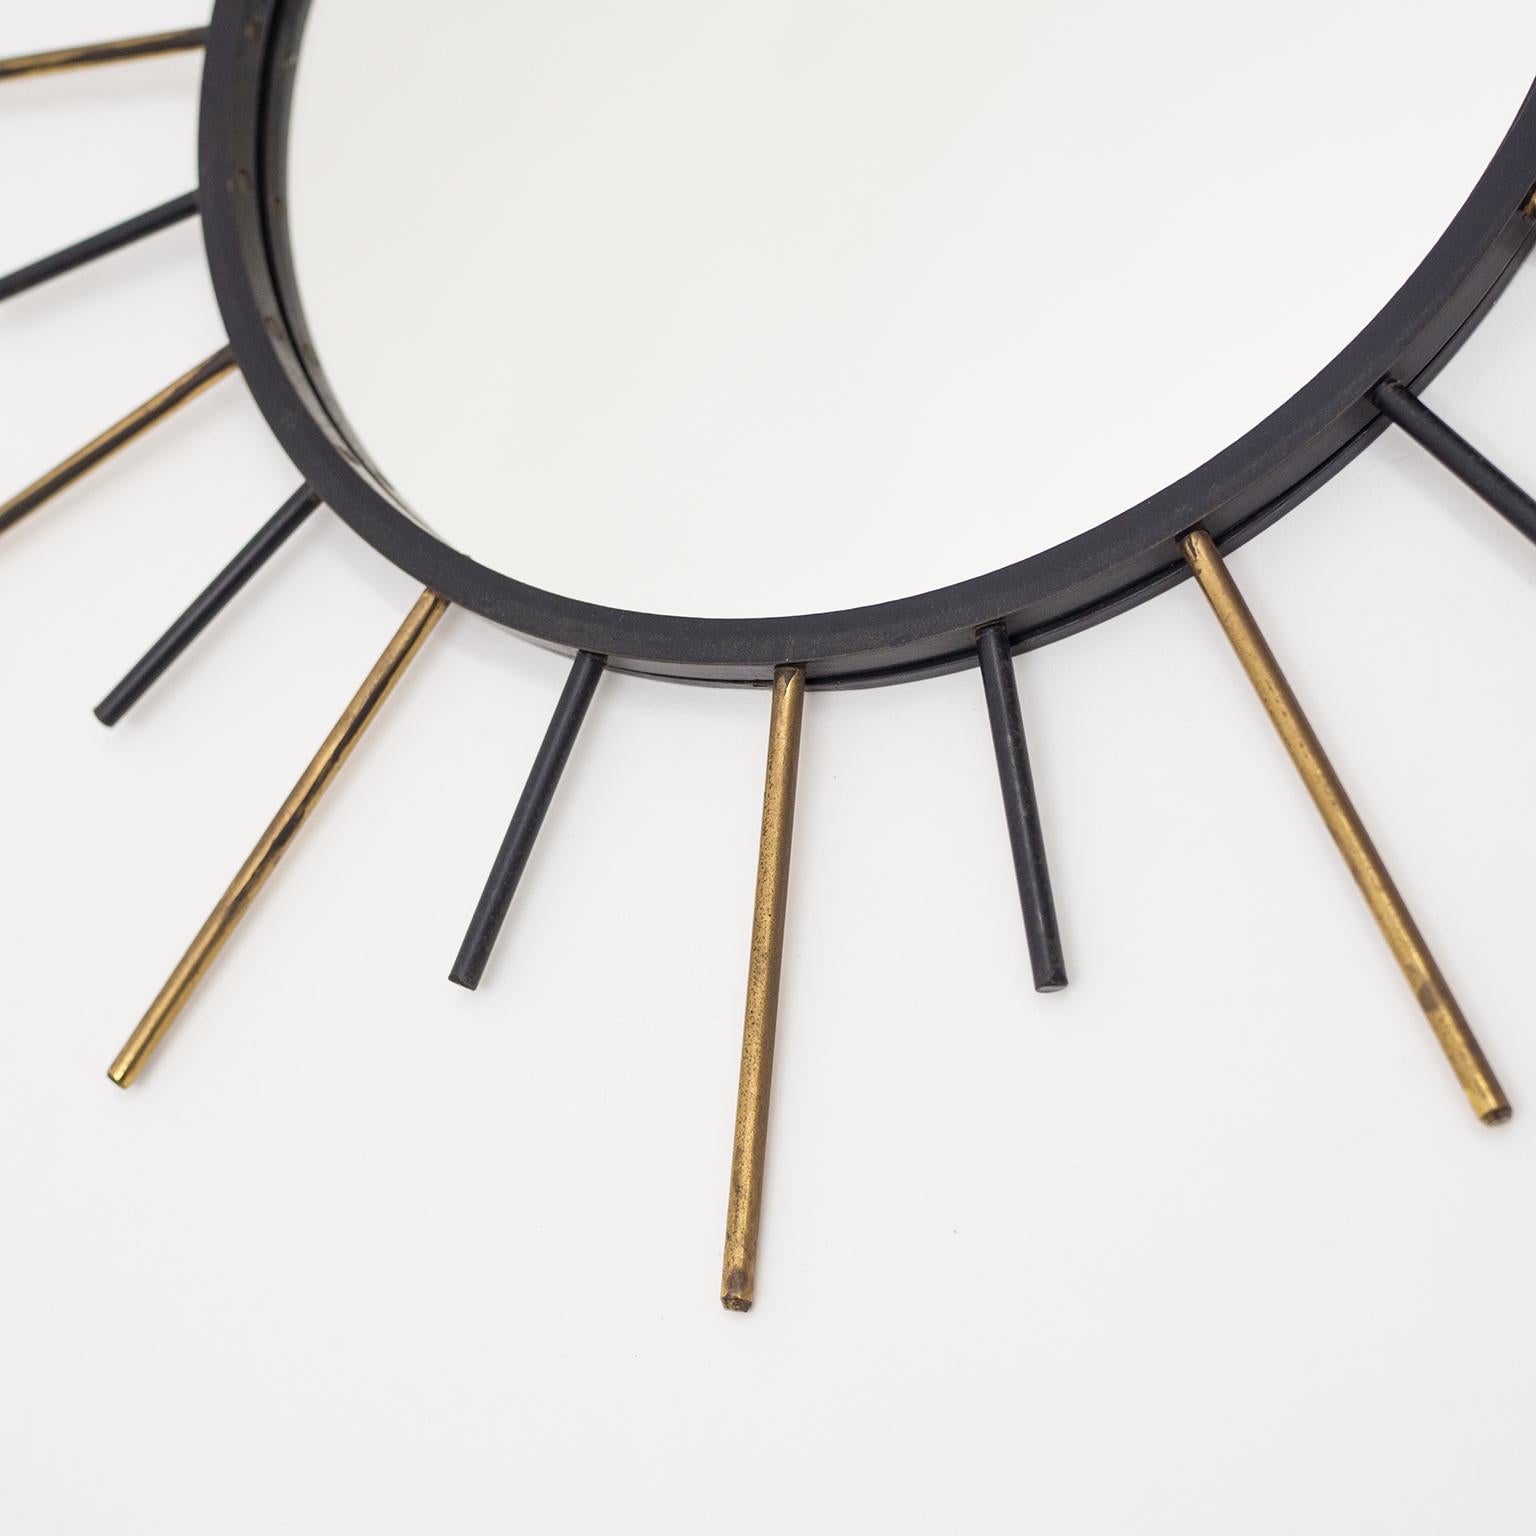 Lacquered 1950s French Sunburst Mirror, Brass and Blackened Steel For Sale